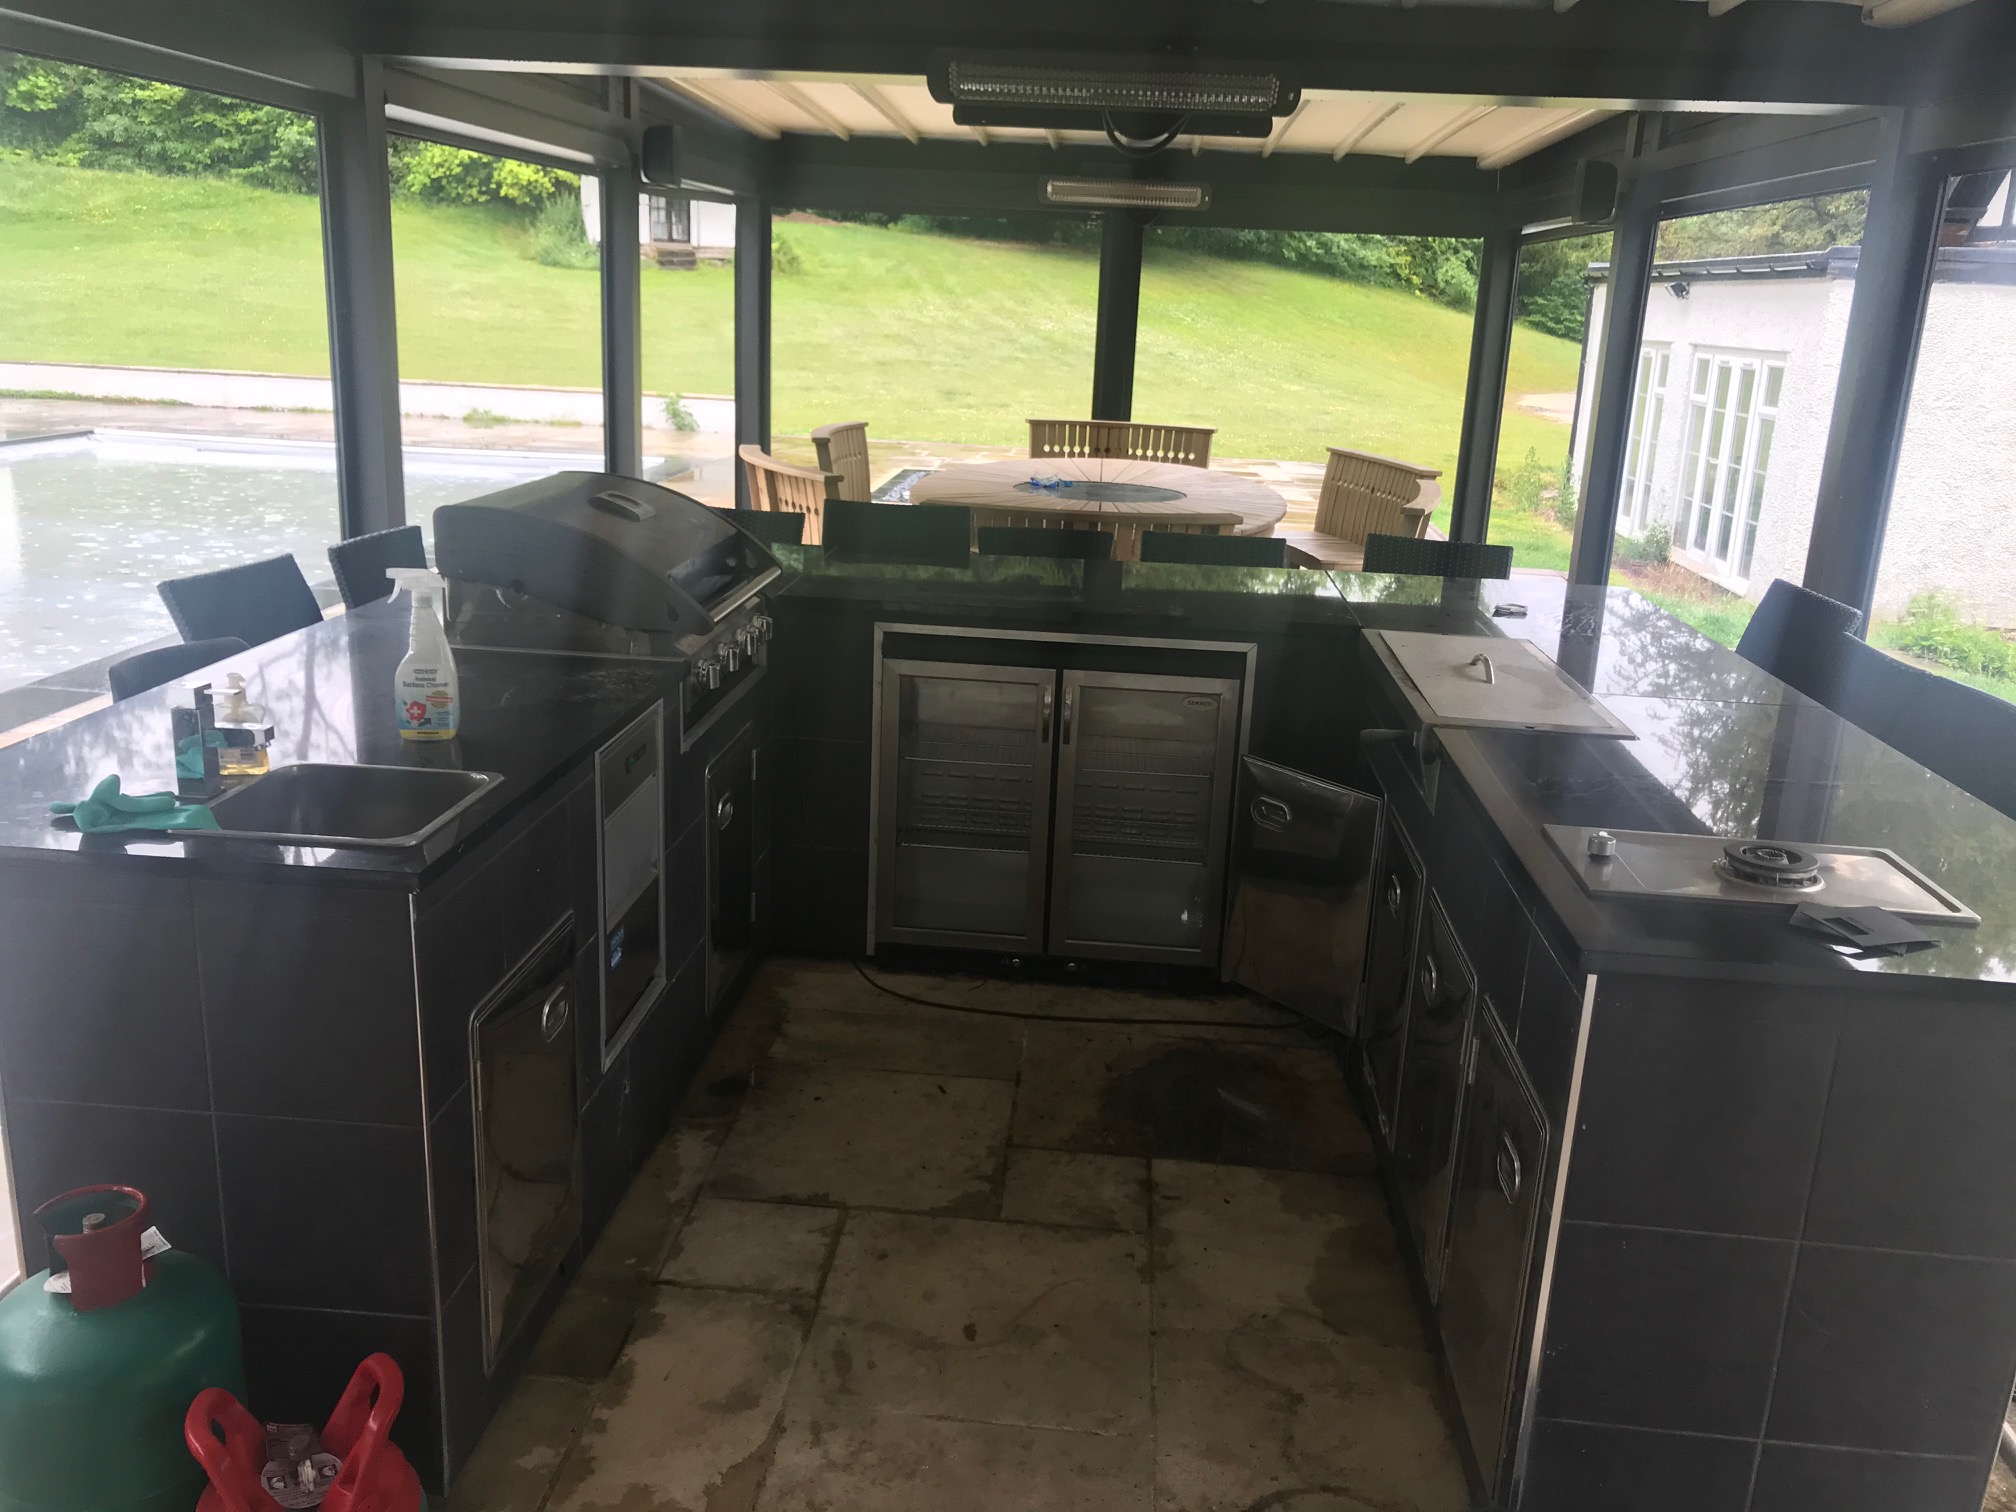 Show us your outdoor kitchen - Page 1 - Homes, Gardens and DIY - PistonHeads